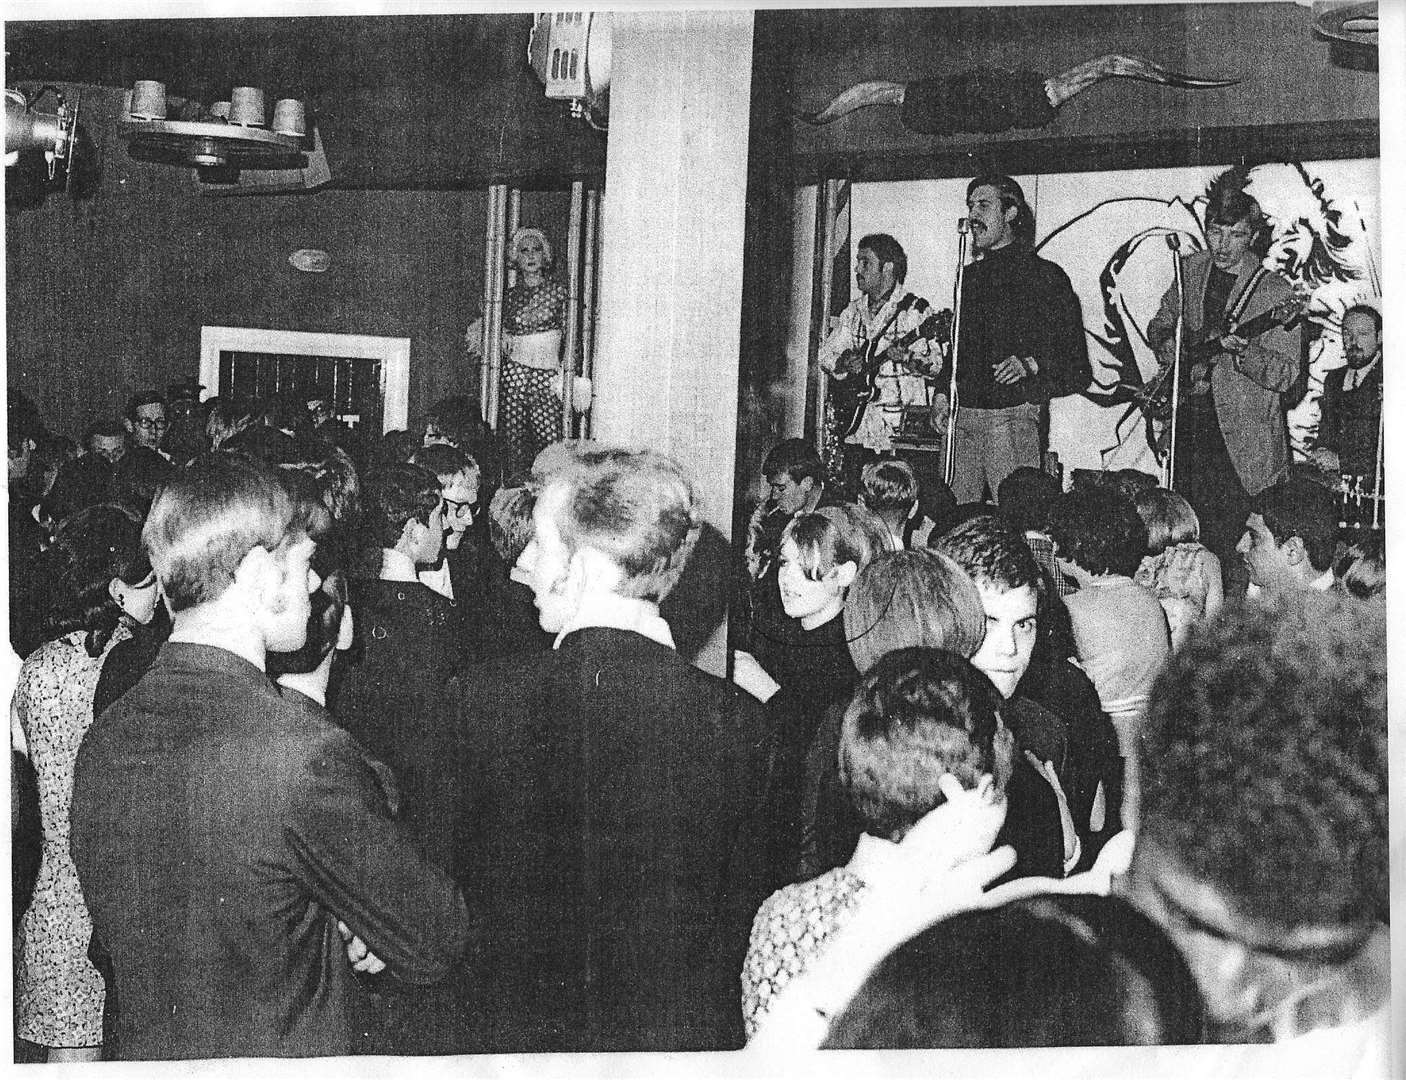 Opening night at The G-Ranch 1967, with Tony Bathurst singing with Factory